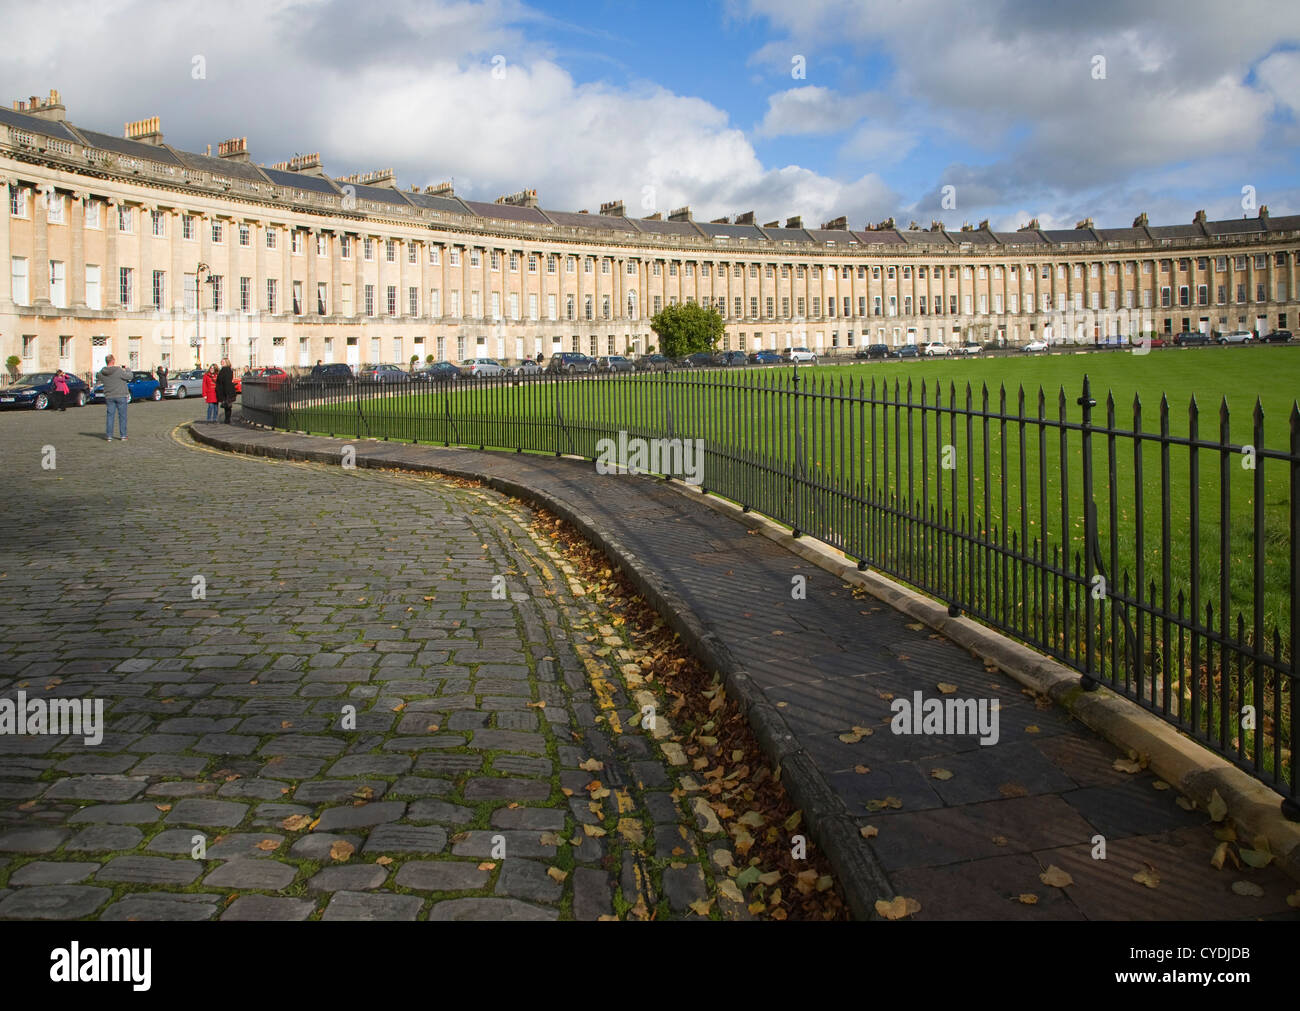 Royal Crescent, Bath, Somerset, England Georgian architecture architect John Wood the Younger built between 1767 and 1774. Stock Photo